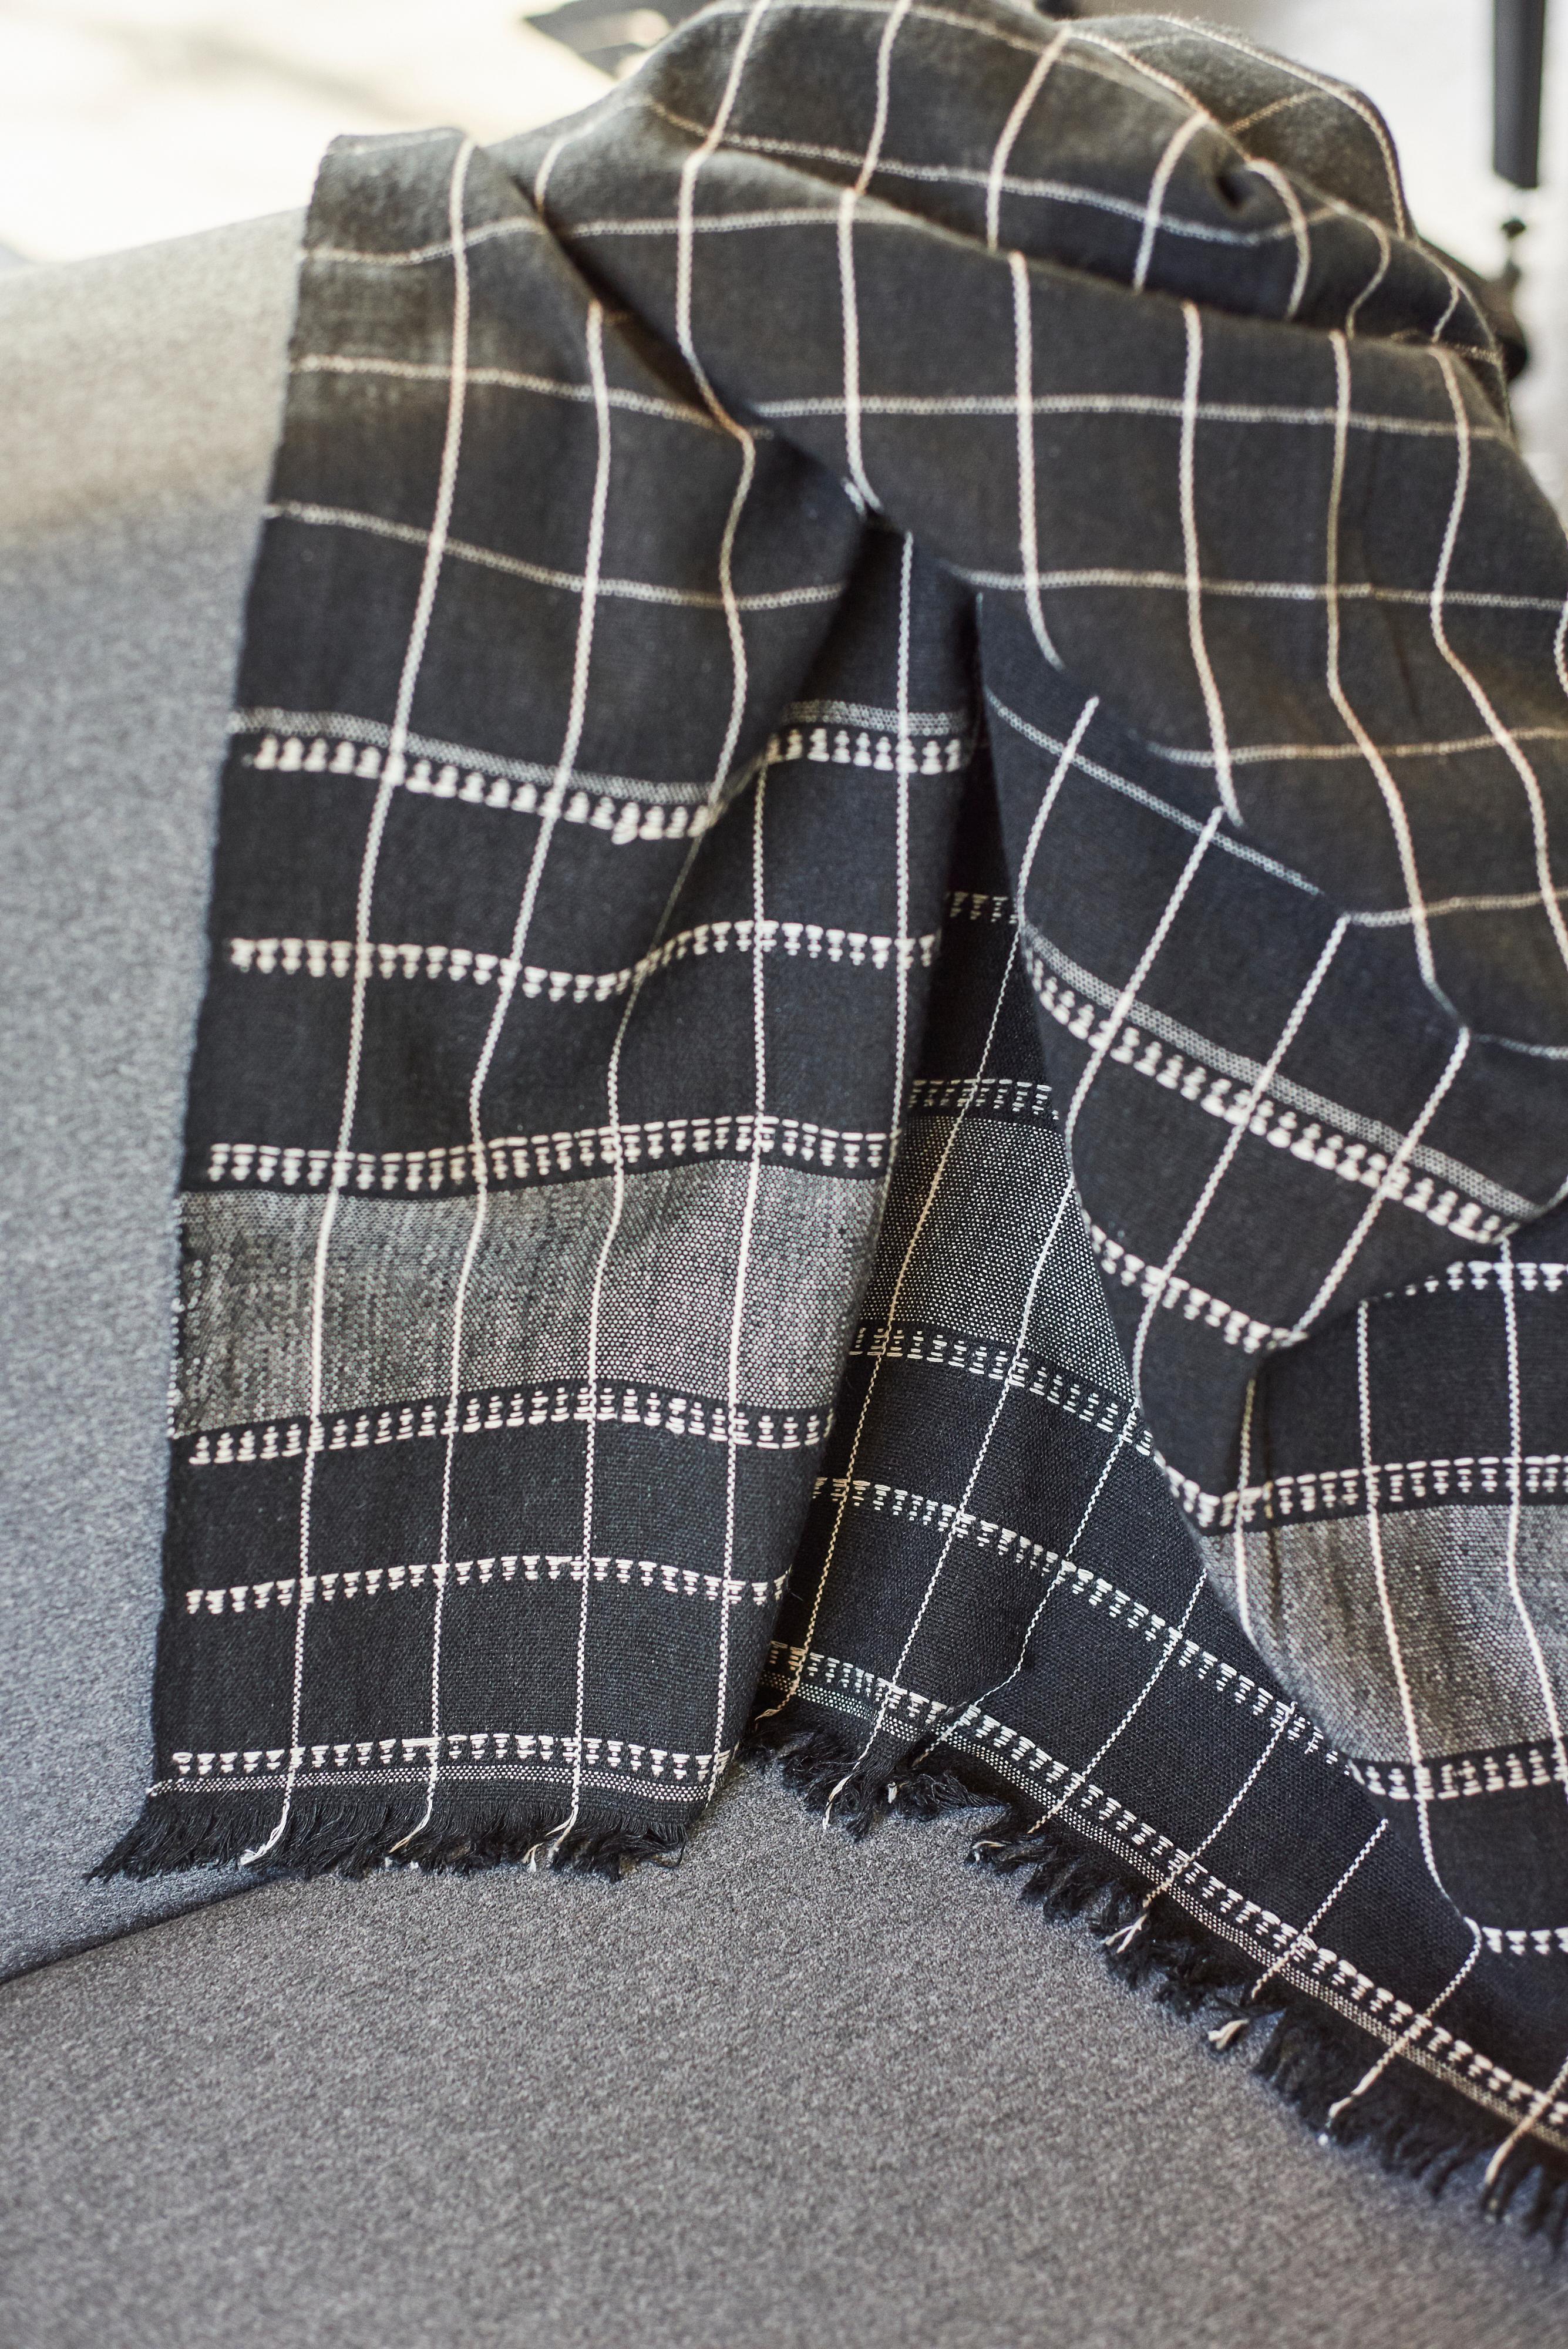 Nepalese Charco  Handloom Throw / Blanket , Charcoal Black Organic Cotton Checks Pattern  For Sale